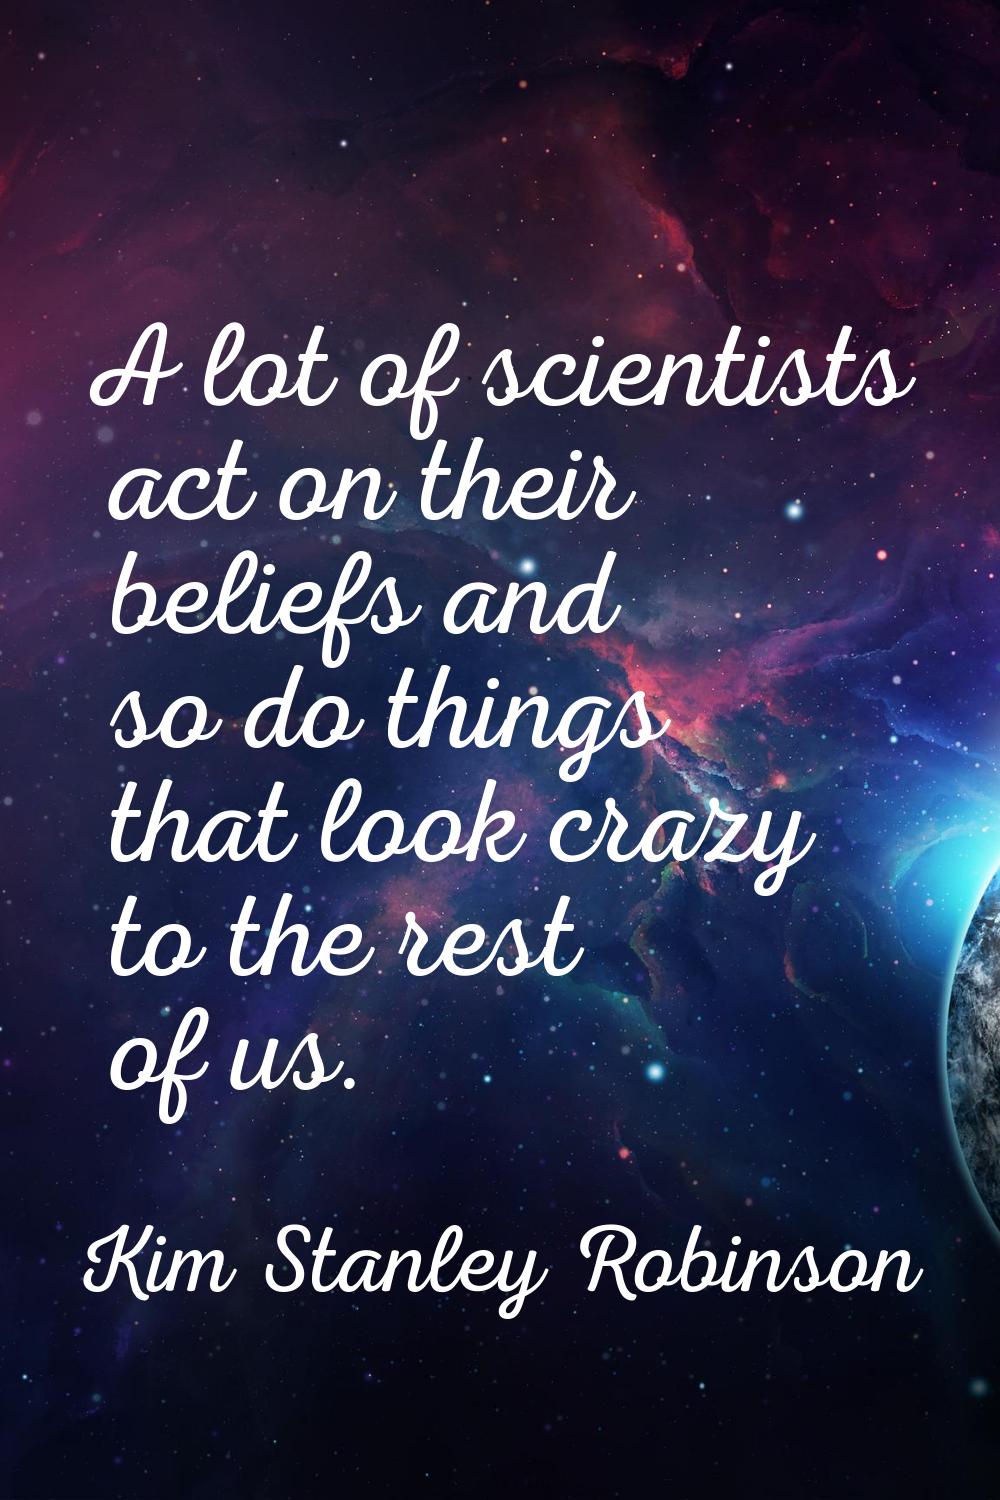 A lot of scientists act on their beliefs and so do things that look crazy to the rest of us.